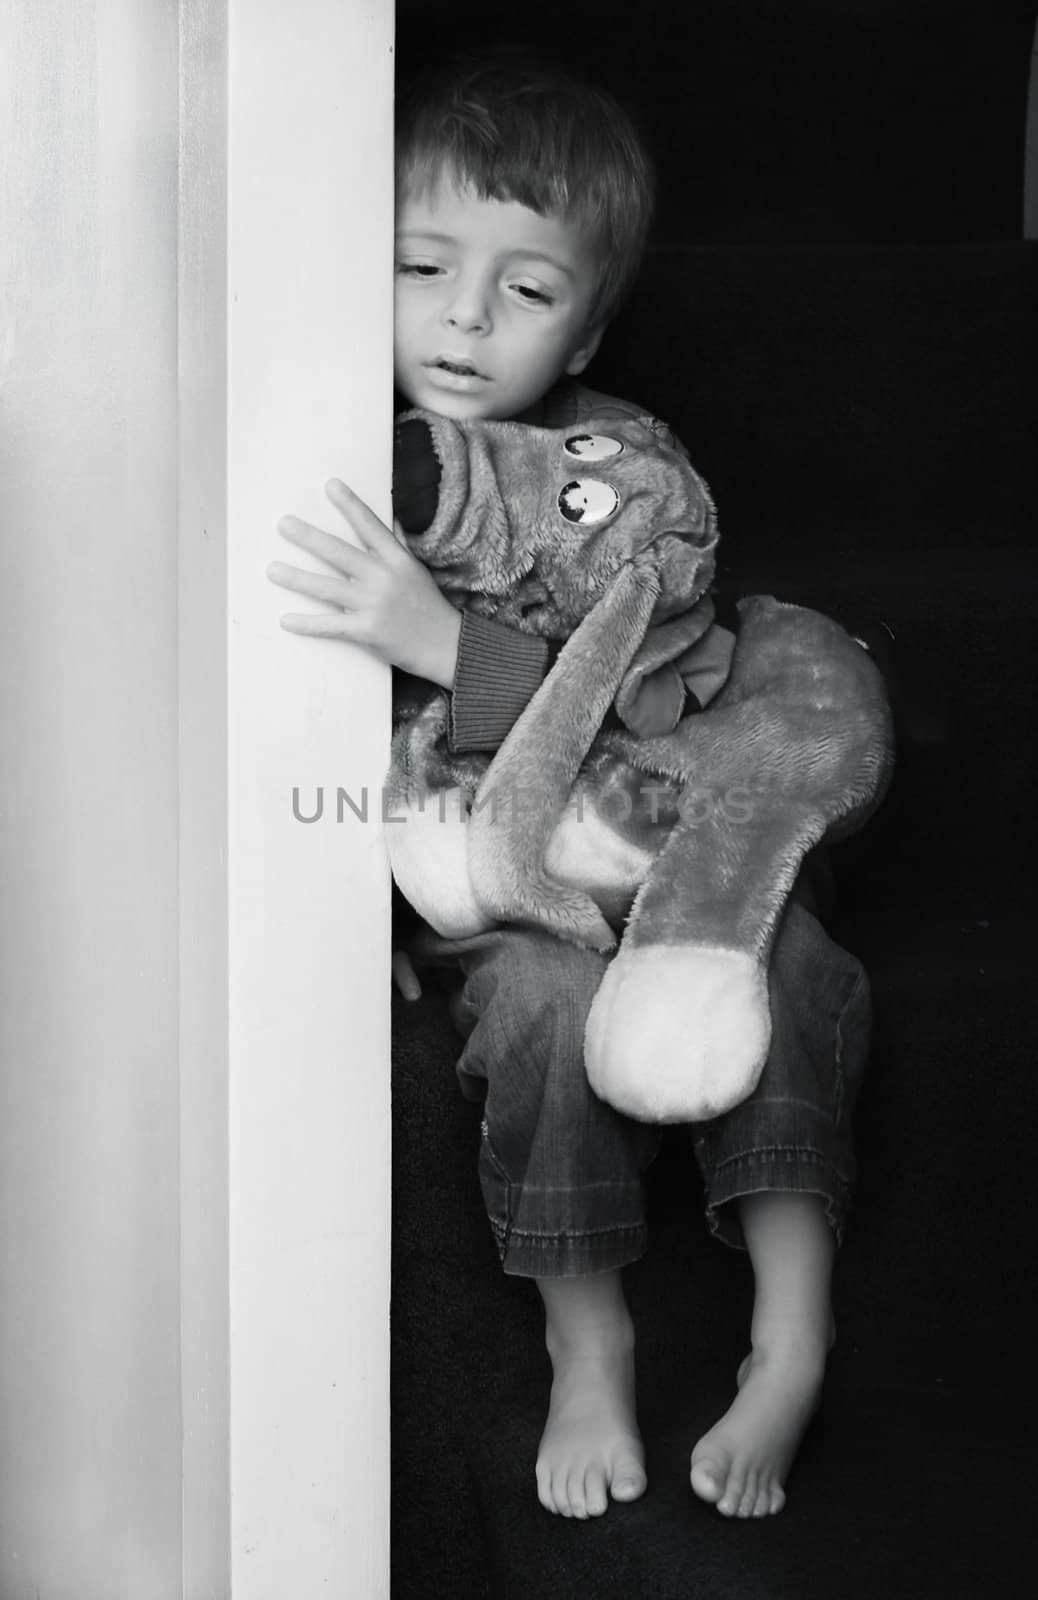 Impression of sad little boy in black and white.
